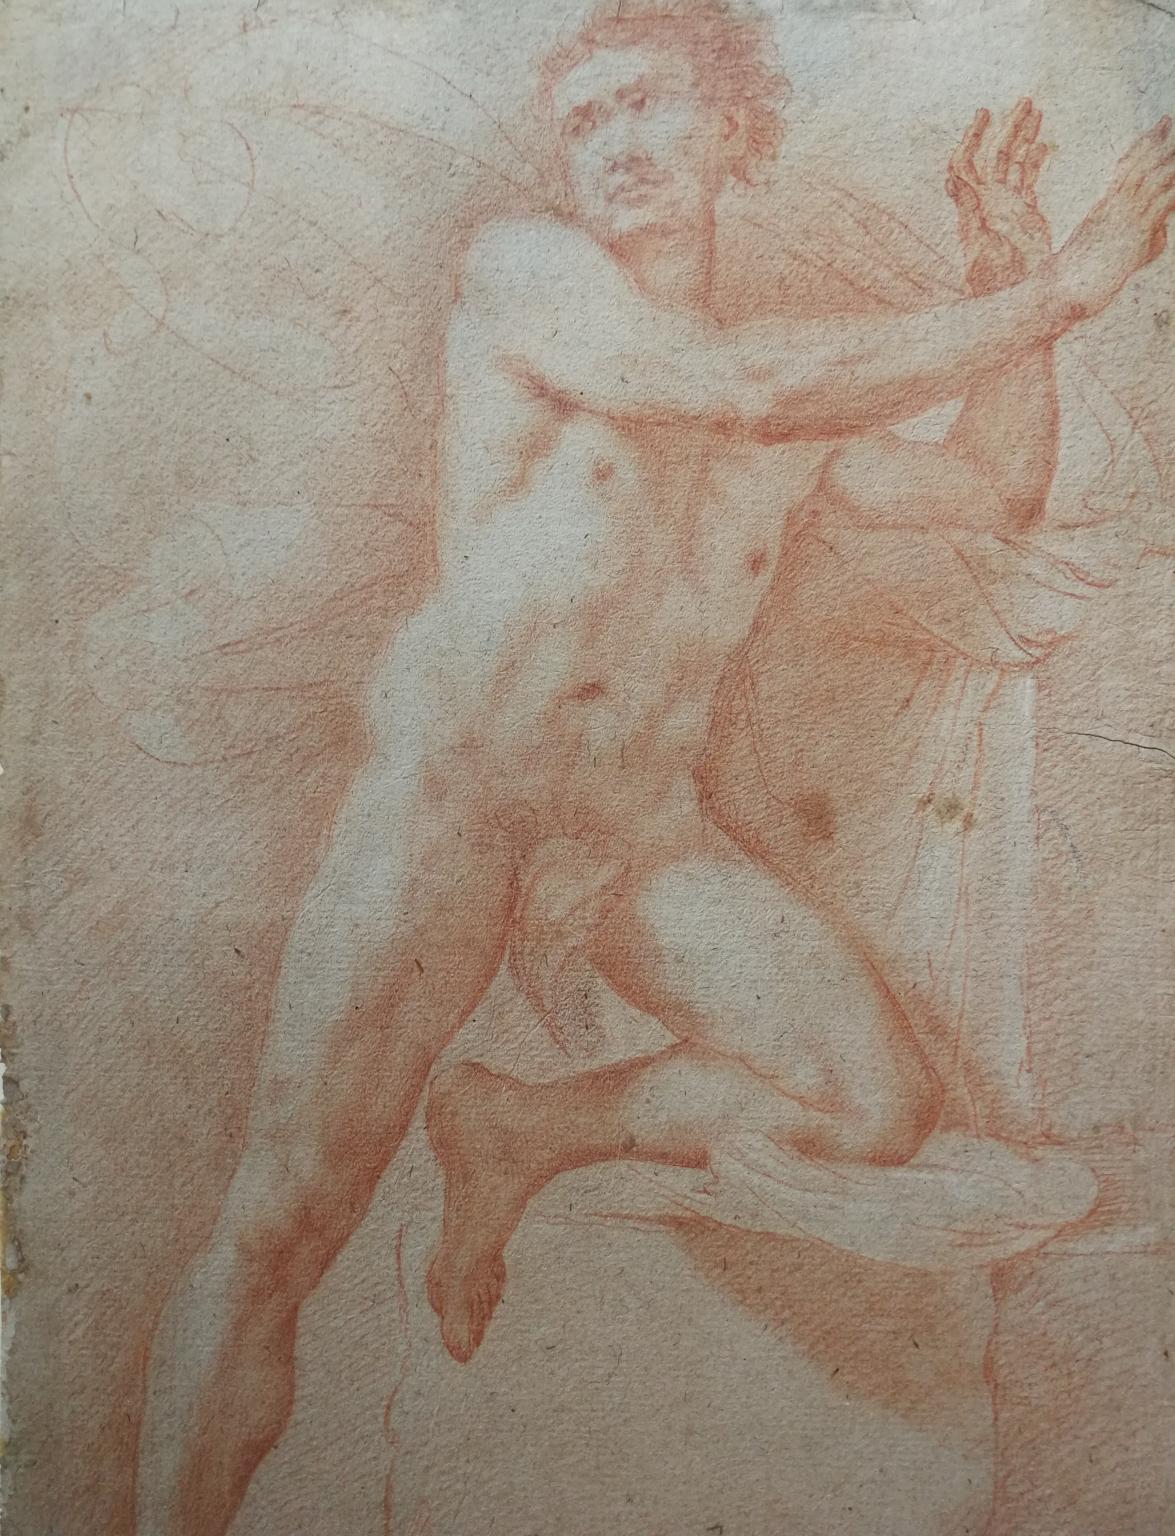 Preparatory Drawing (sanguine on paper, 42 x 28 cm) by Francesco Furini for the making of the Saint Sebastian, ordered by the prince Lorenzo de' Medici in 1642, held at Schleissheim Castle in Munich. Expertise by professor Giuseppe Cantelli.